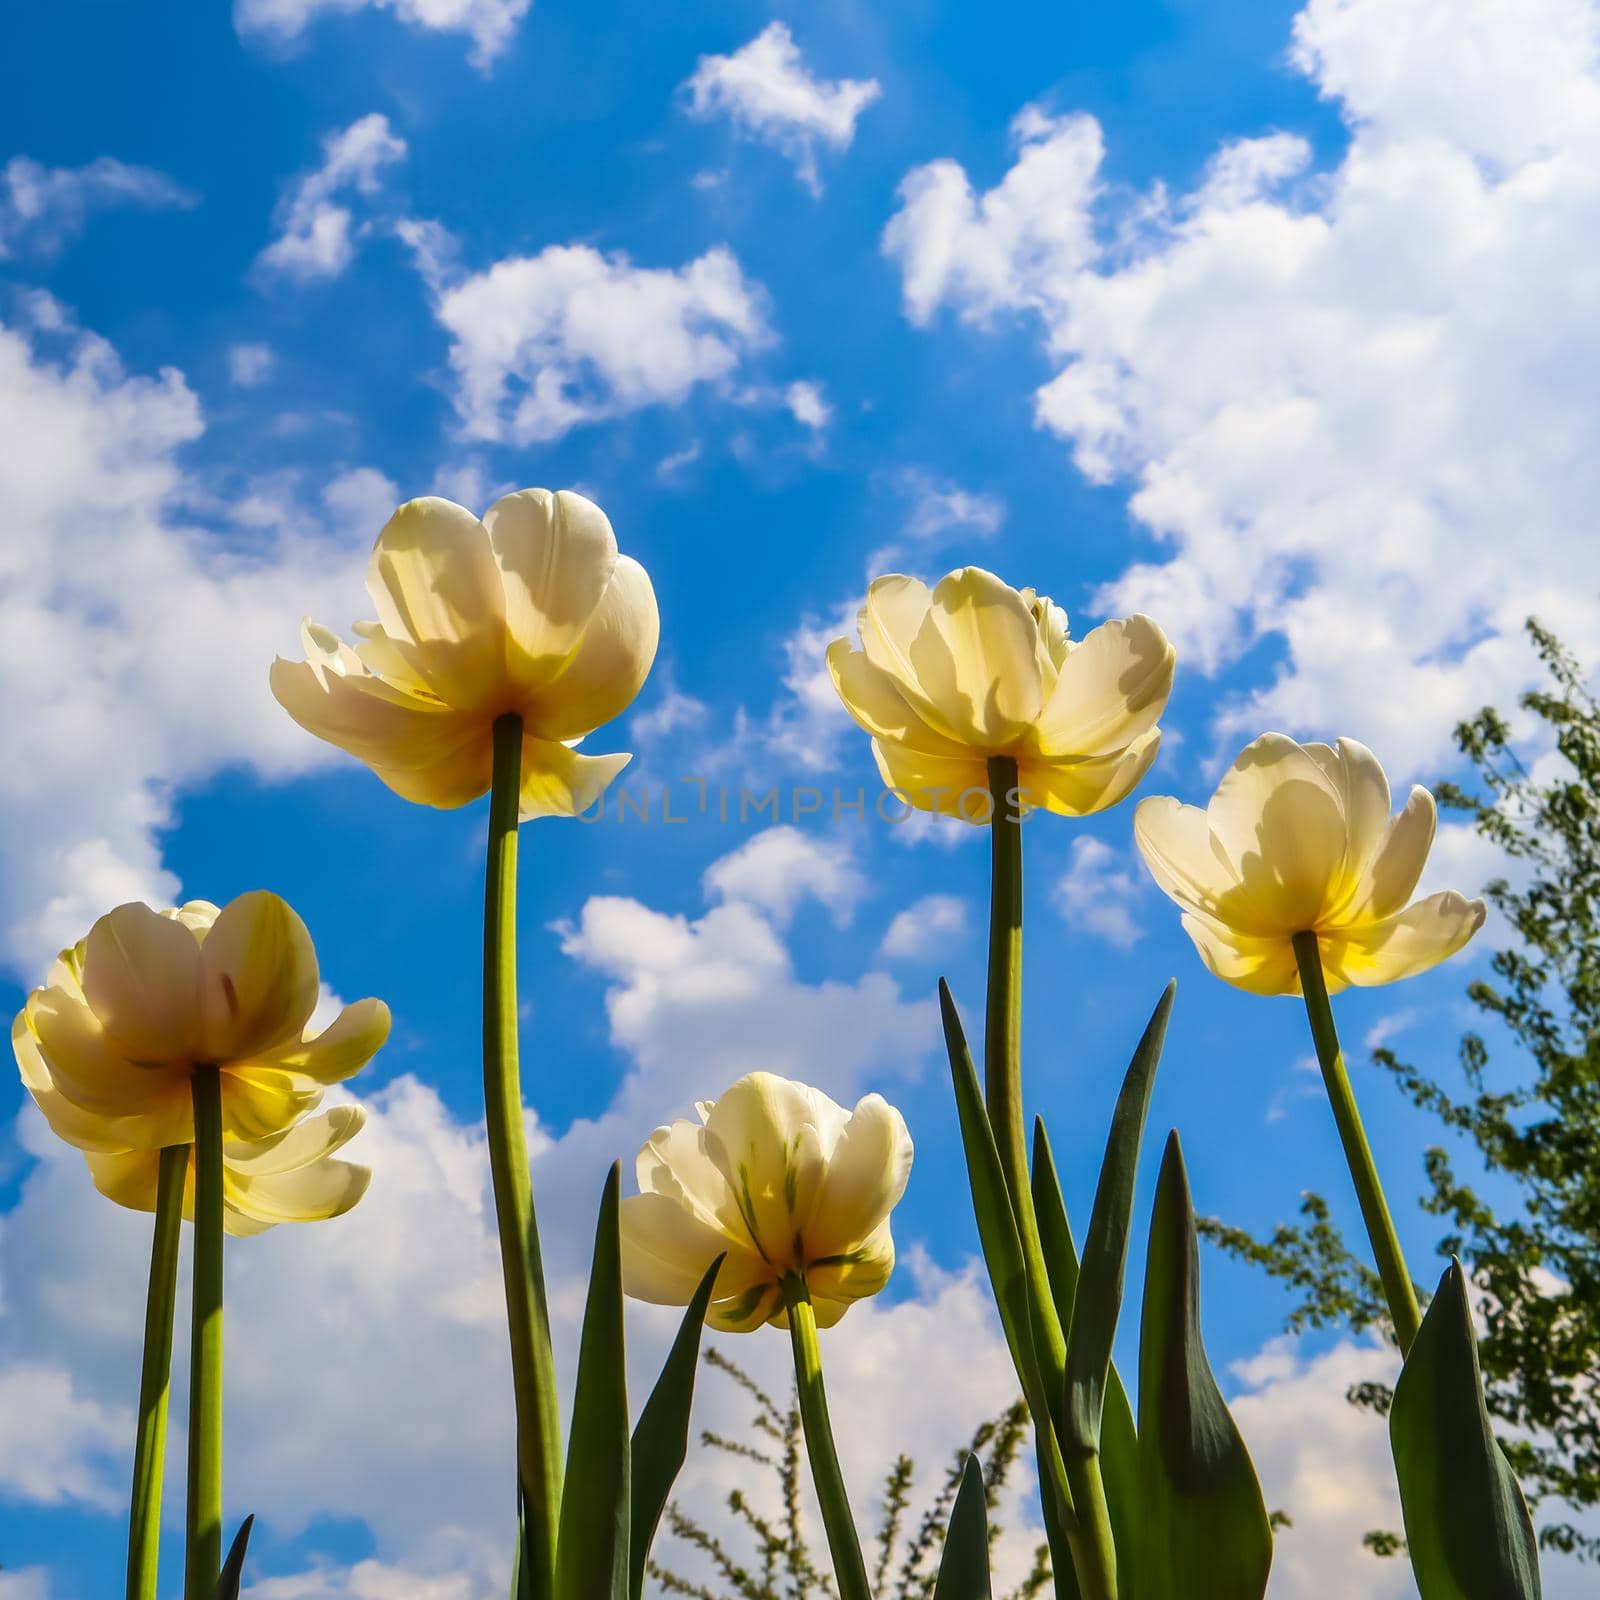 Beautiful yellow tulips on background of blue sky with clouds